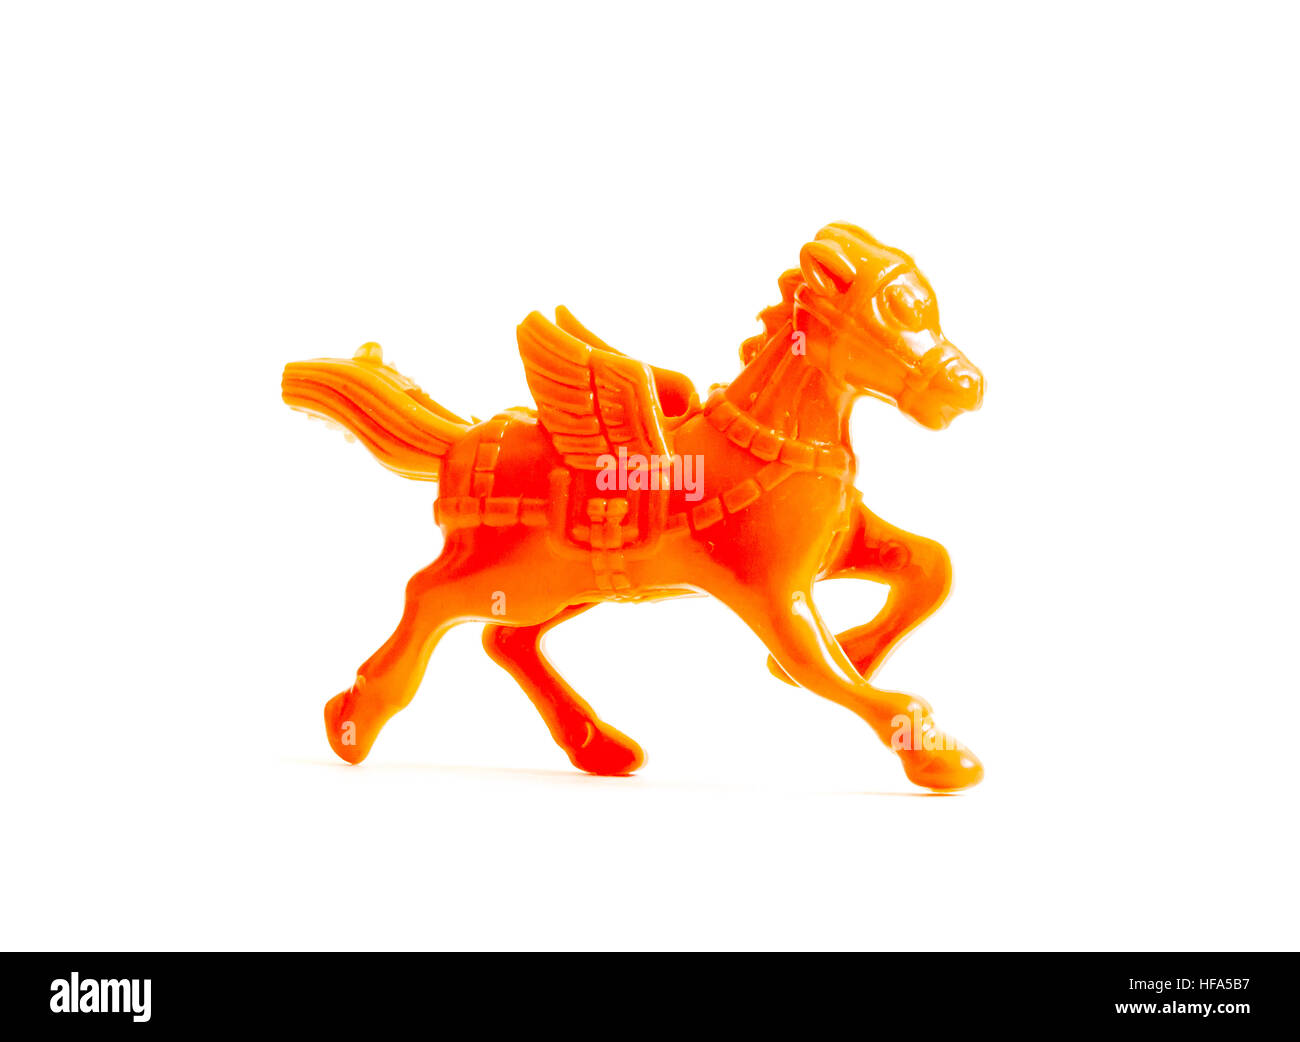 GOMEL, BELARUS - September 13, 2016: Kinder surpise Miniature toy horse, by Ferero. Ferrero SpA  is an Italian manufacturer of branded chocolate. Stock Photo